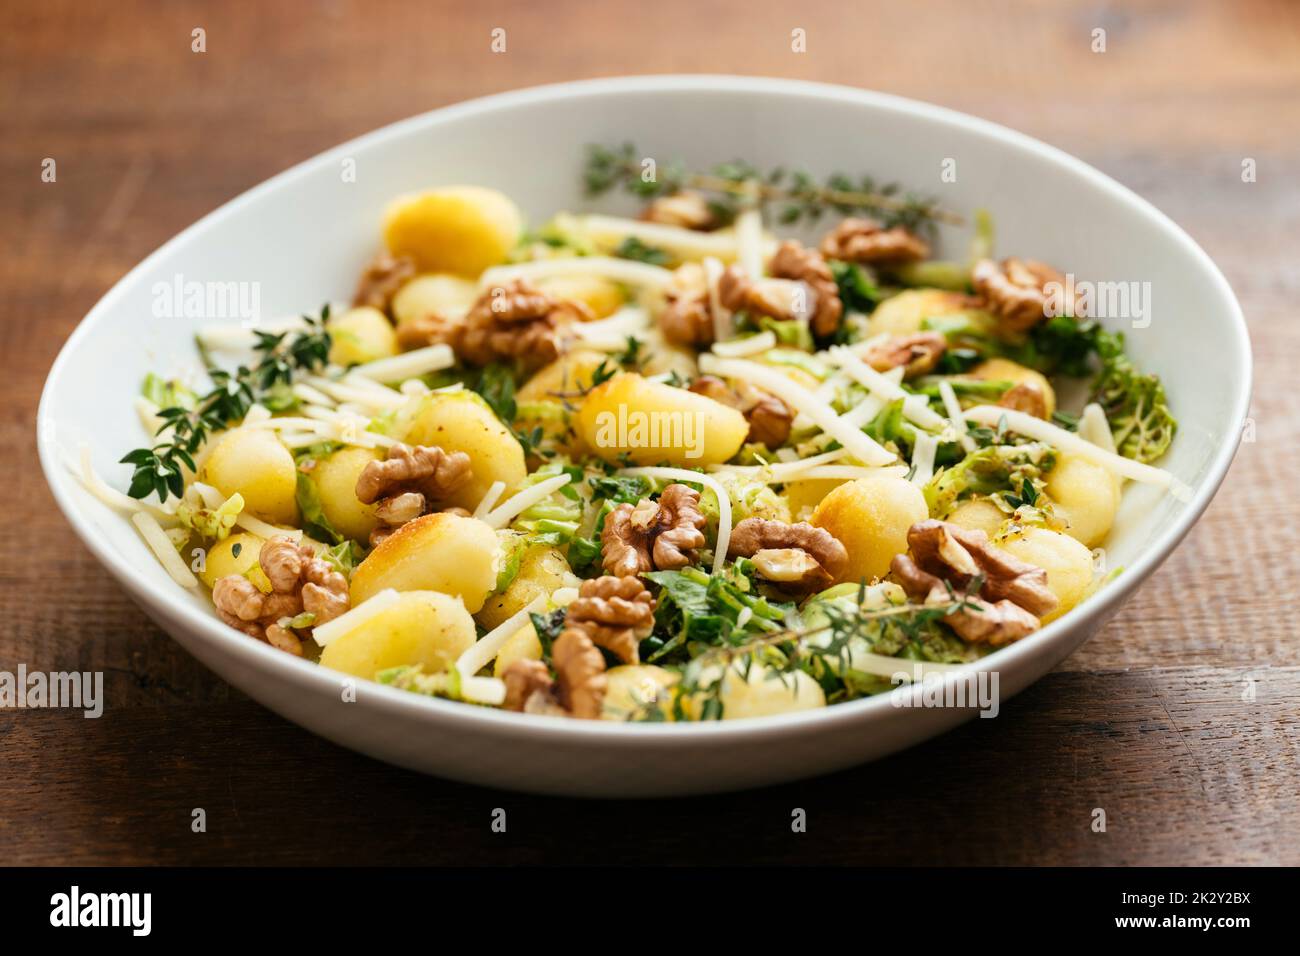 Home made Gnocchi with Savoy Cabbage and Walnuts Stock Photo